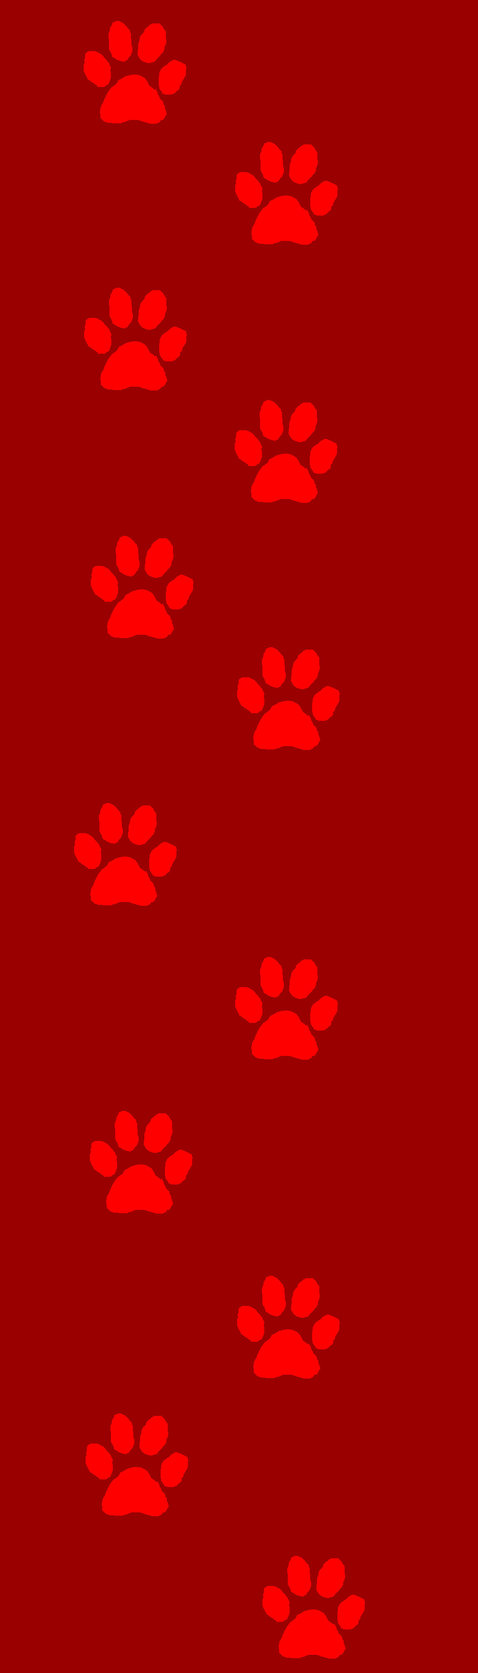 Dog Paws Wallpaper On